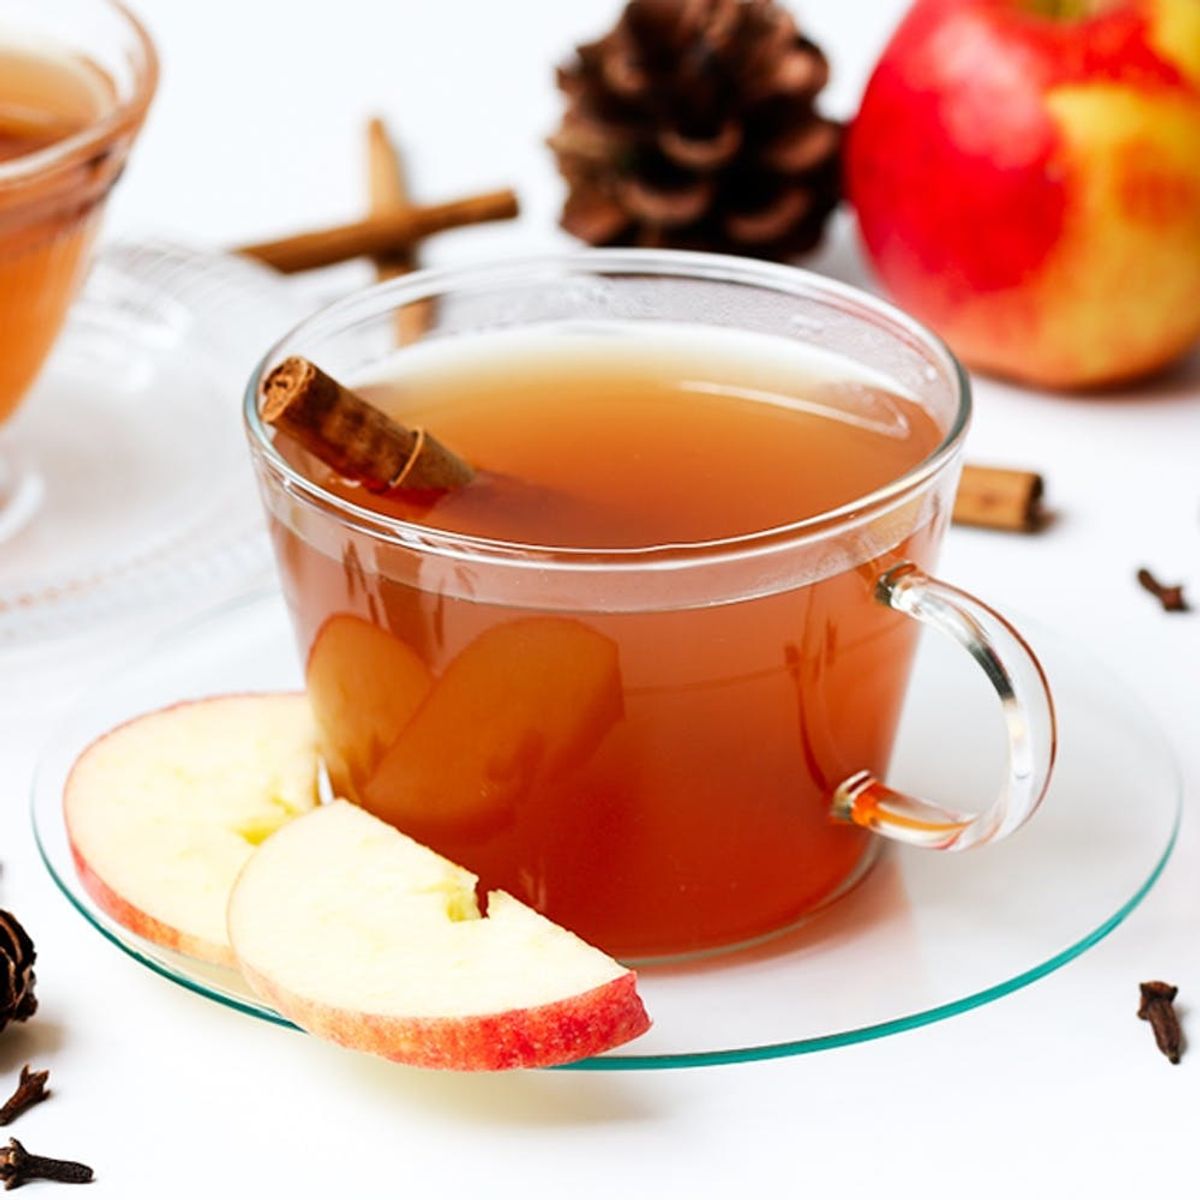 Make Your House Smell like Christmas With This Slow Cooker Mulled Apple Cider Recipe